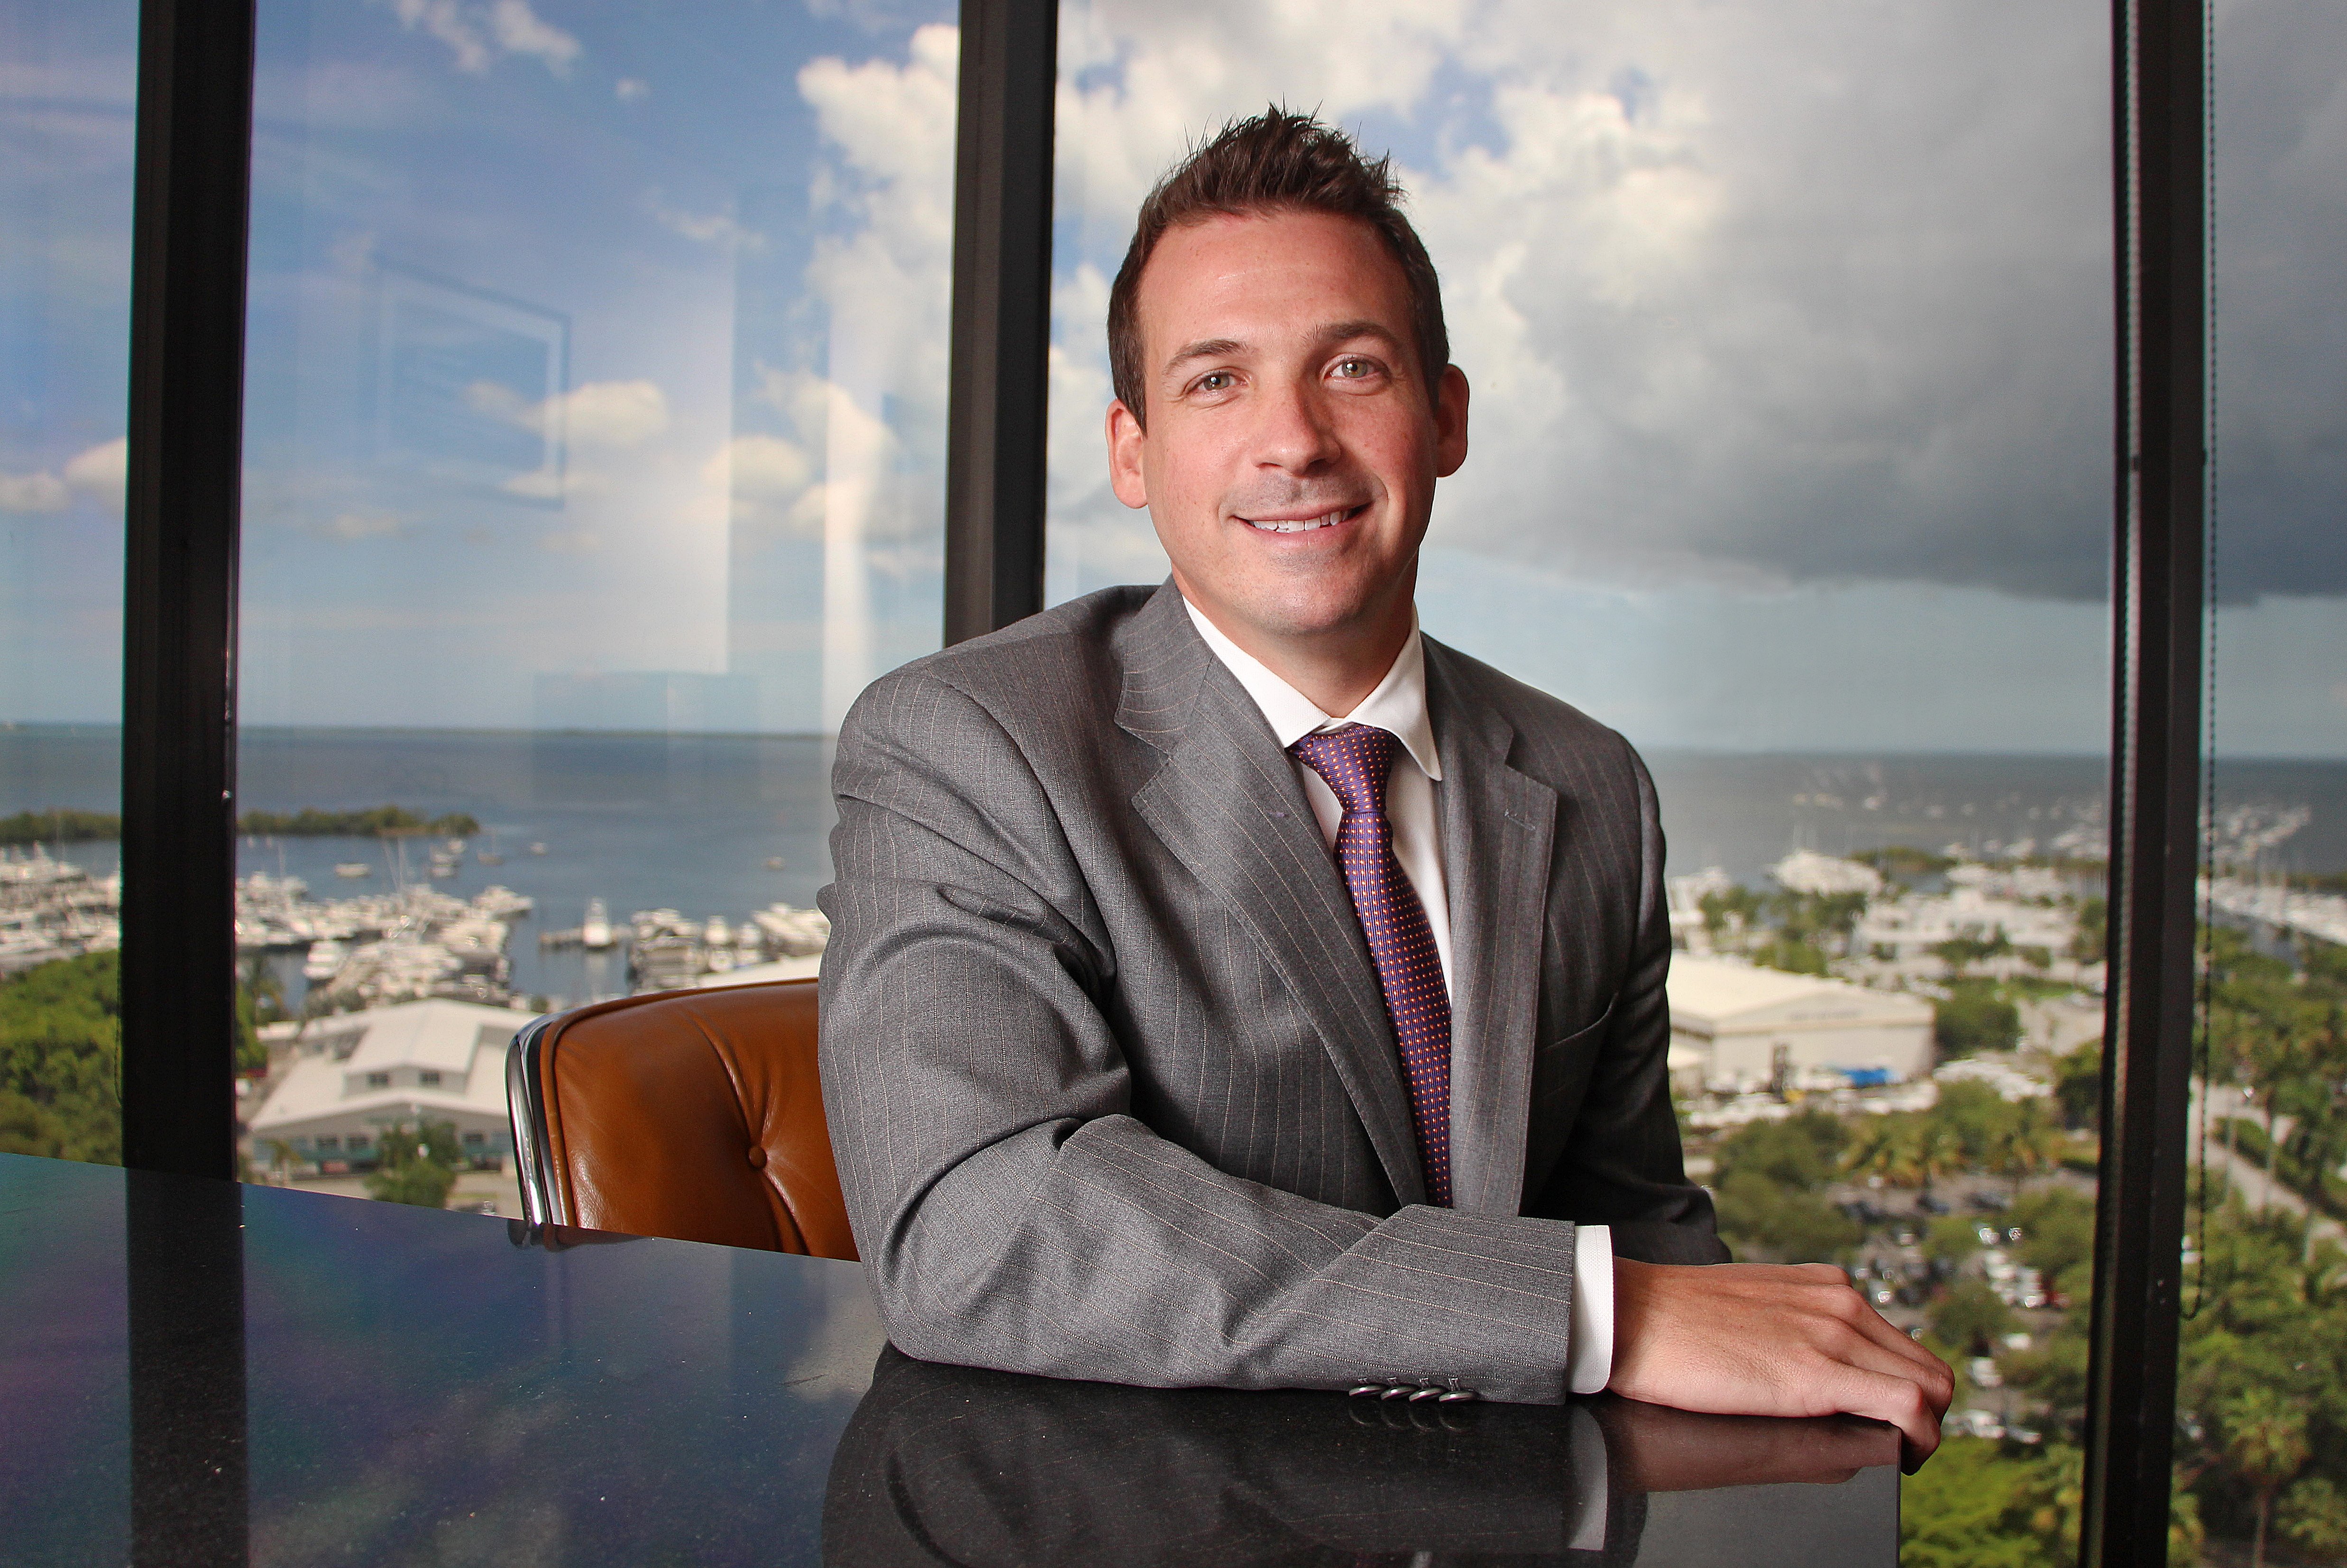 Miami Dade Judge Strikes Plaintiff's Pleadings for Fraud on Court in 2M Business Dispute